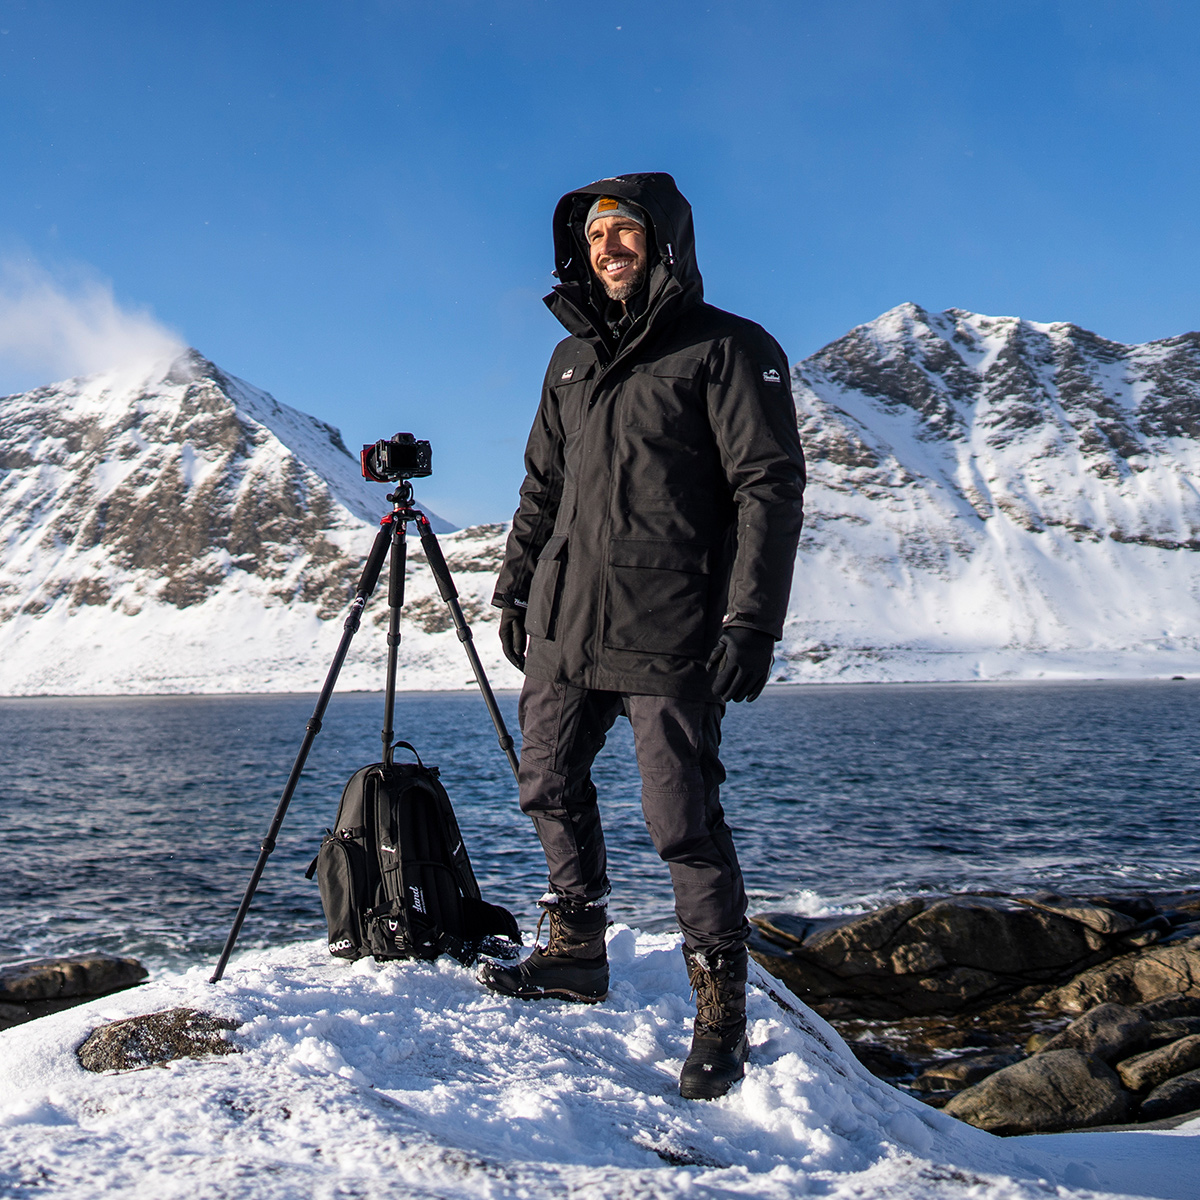 Haukland Photography Jacket Review: Snug as a Bug with Pockets